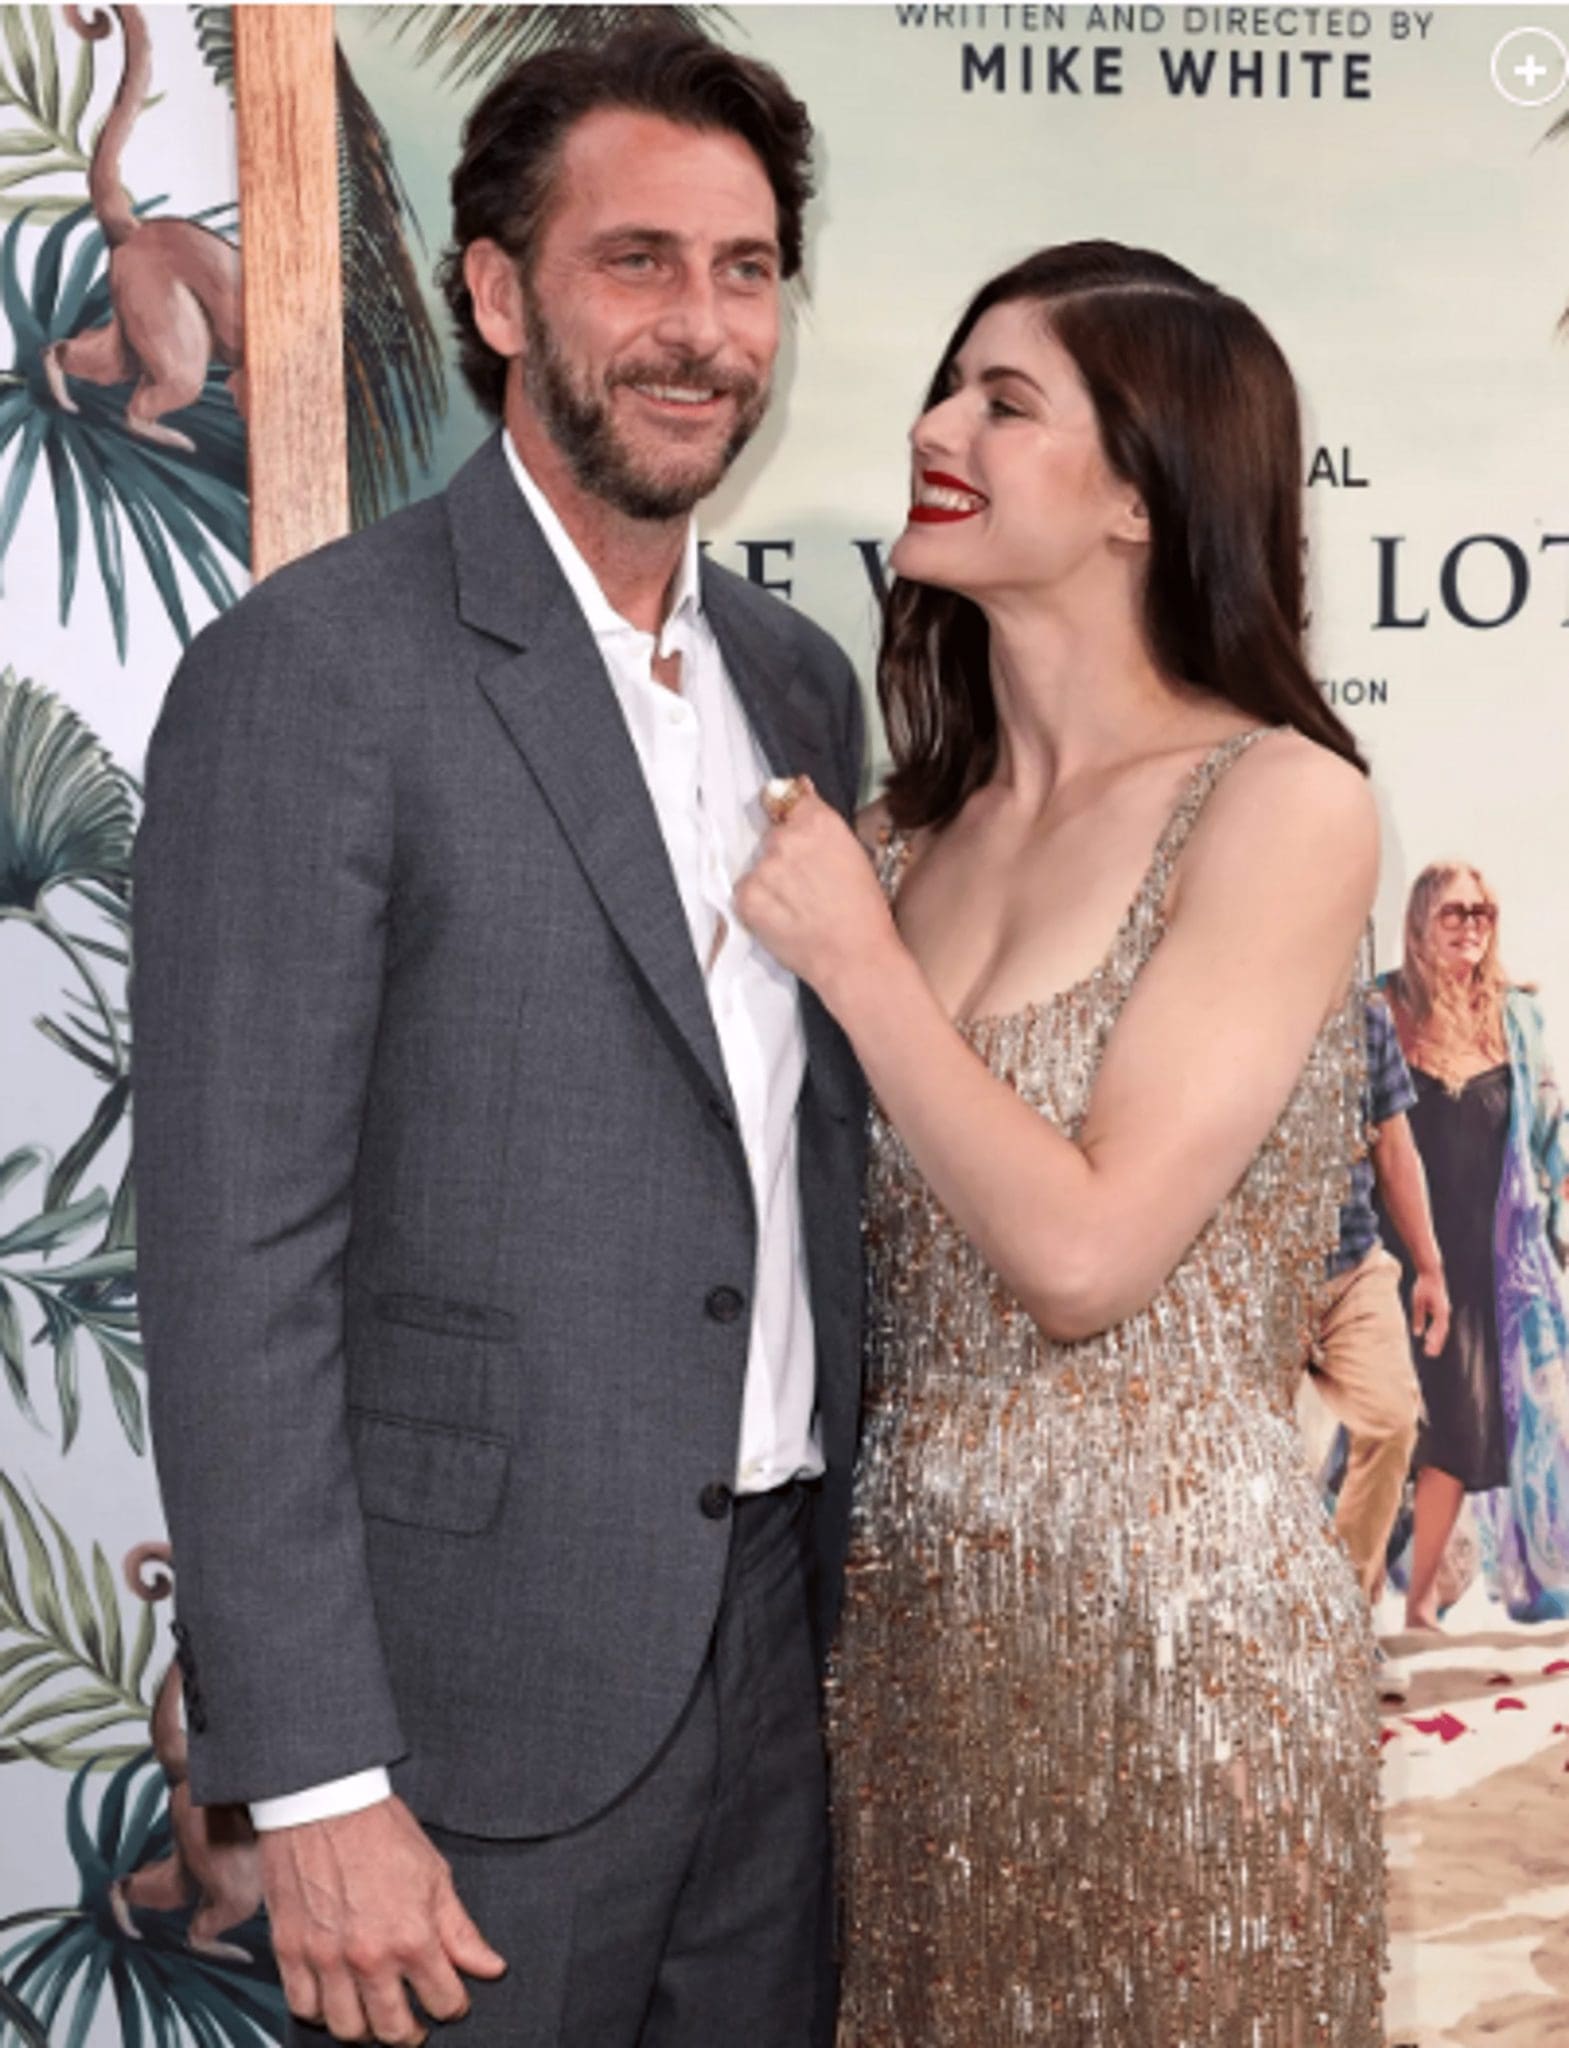 Another happy Hollywood married couple just got bigger as actress Alexandra Daddario and Andrew Form got married